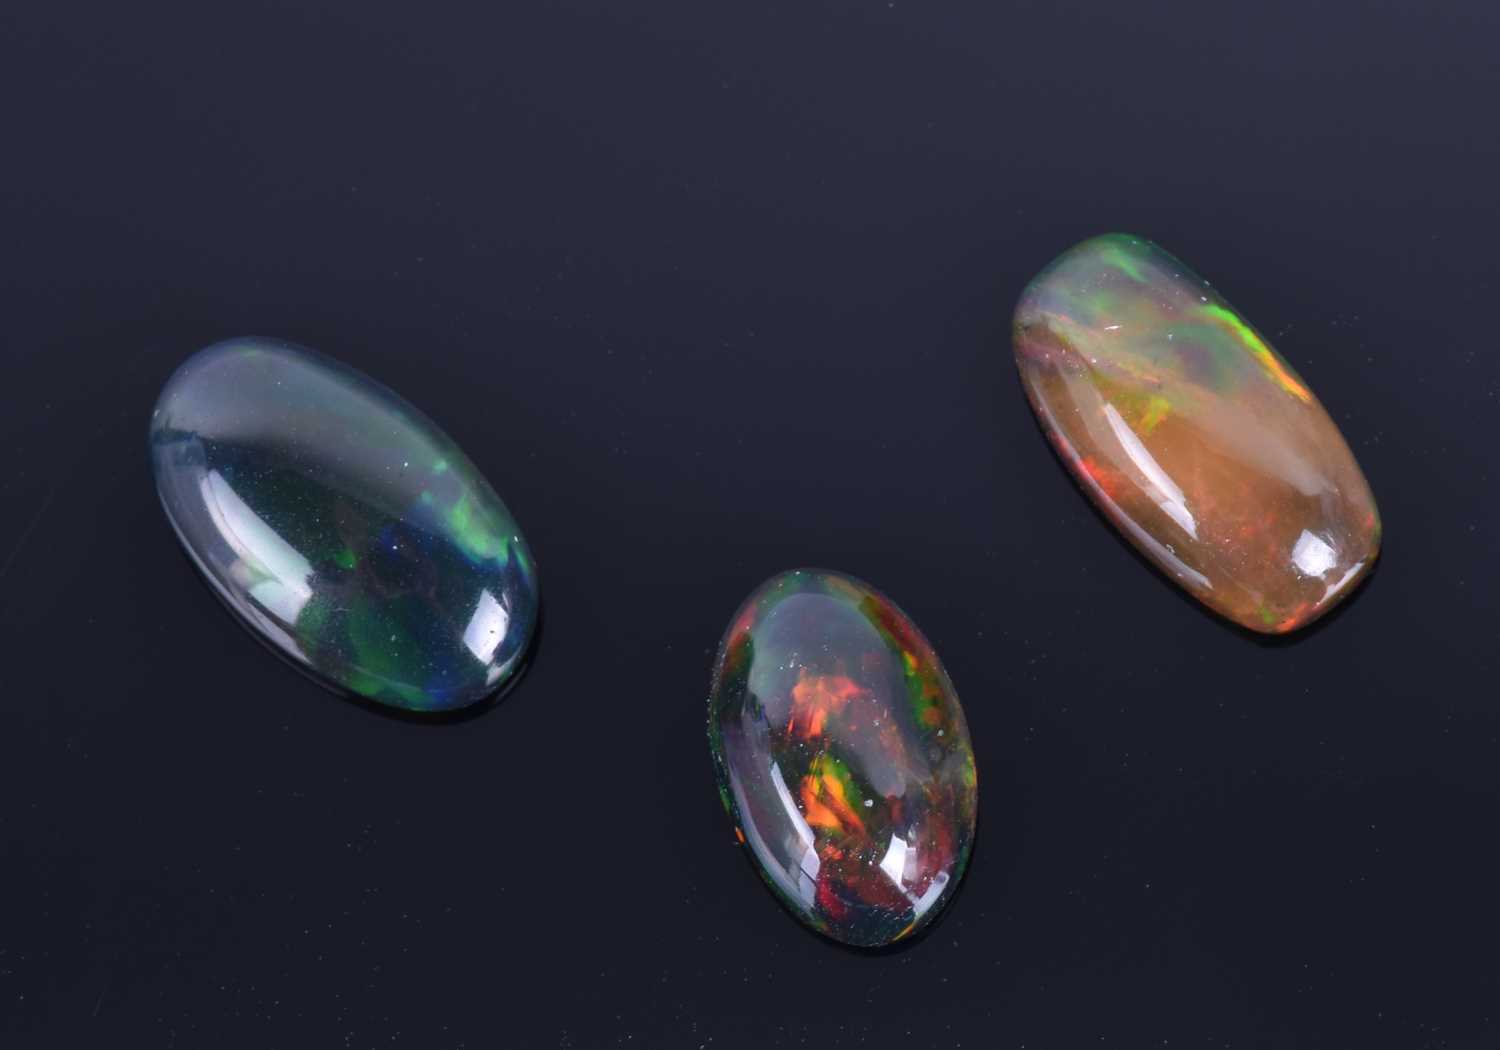 A group of three cabochon opalscomprising 2.25 carat, 1.88 carat, and 2.53 carat opals. (3) Please